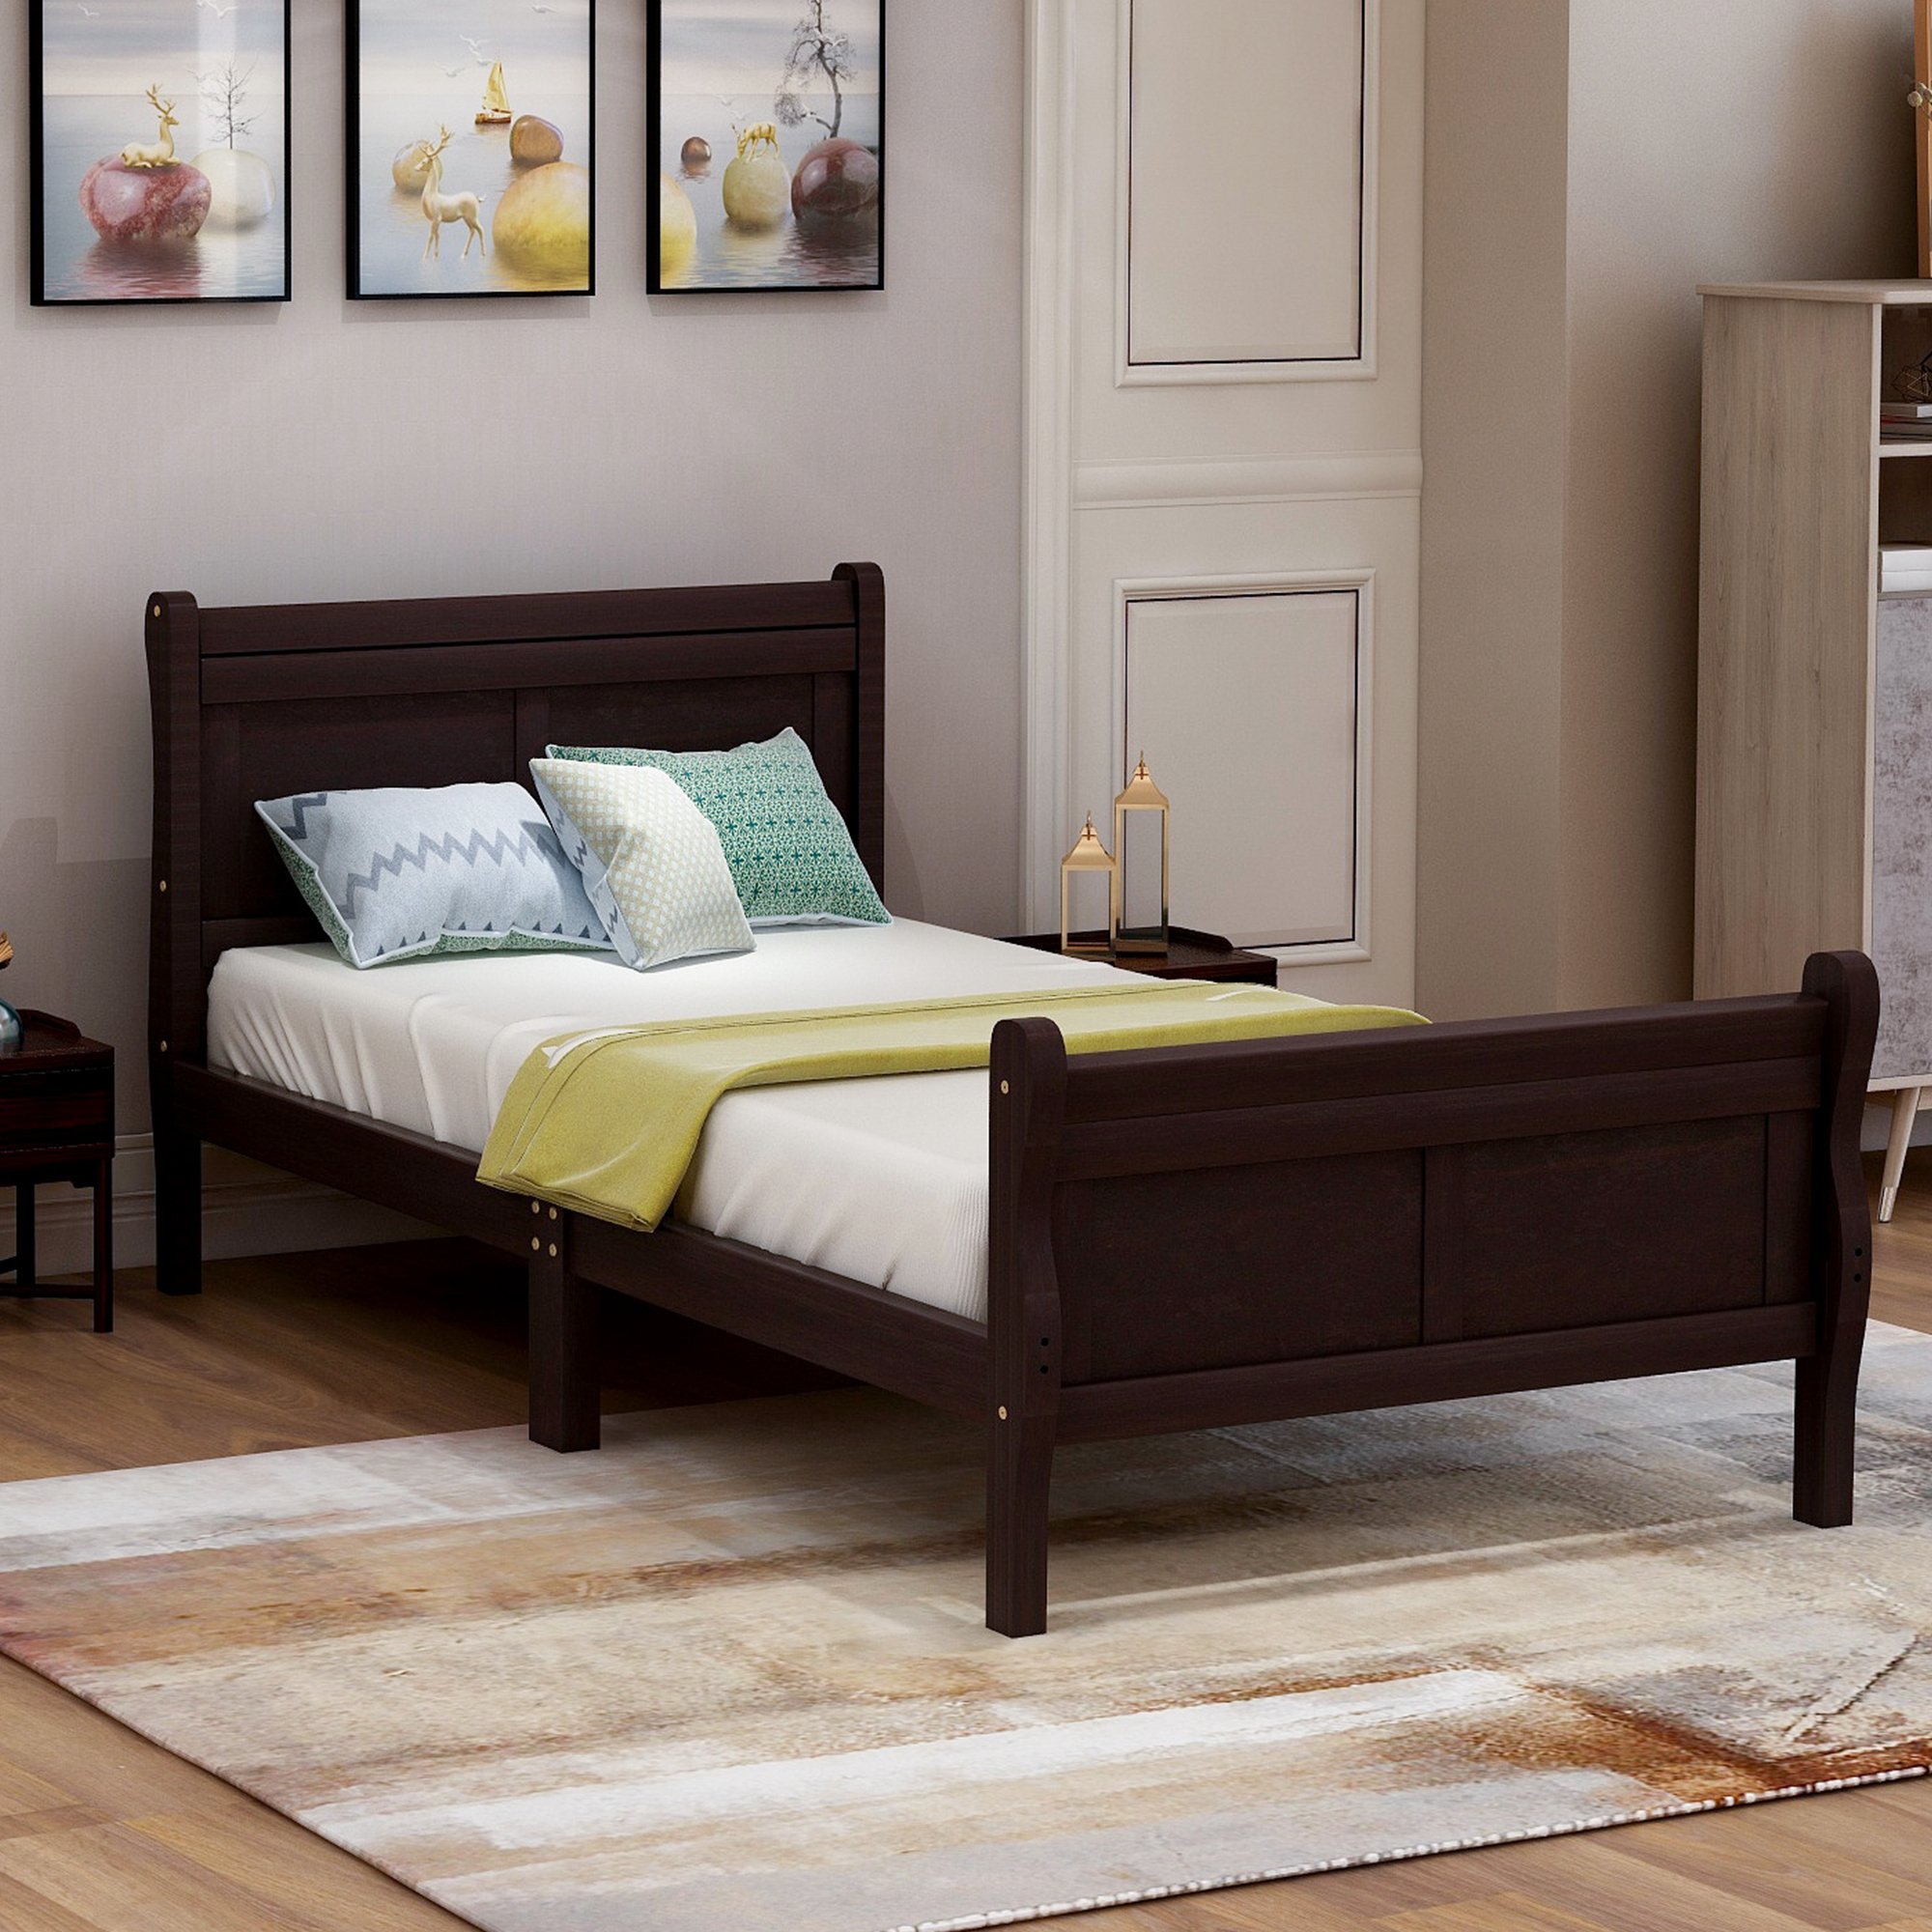 Twin Wood Platform Bed Frame With, King Size Wood Bed Frame With Headboard And Footboard